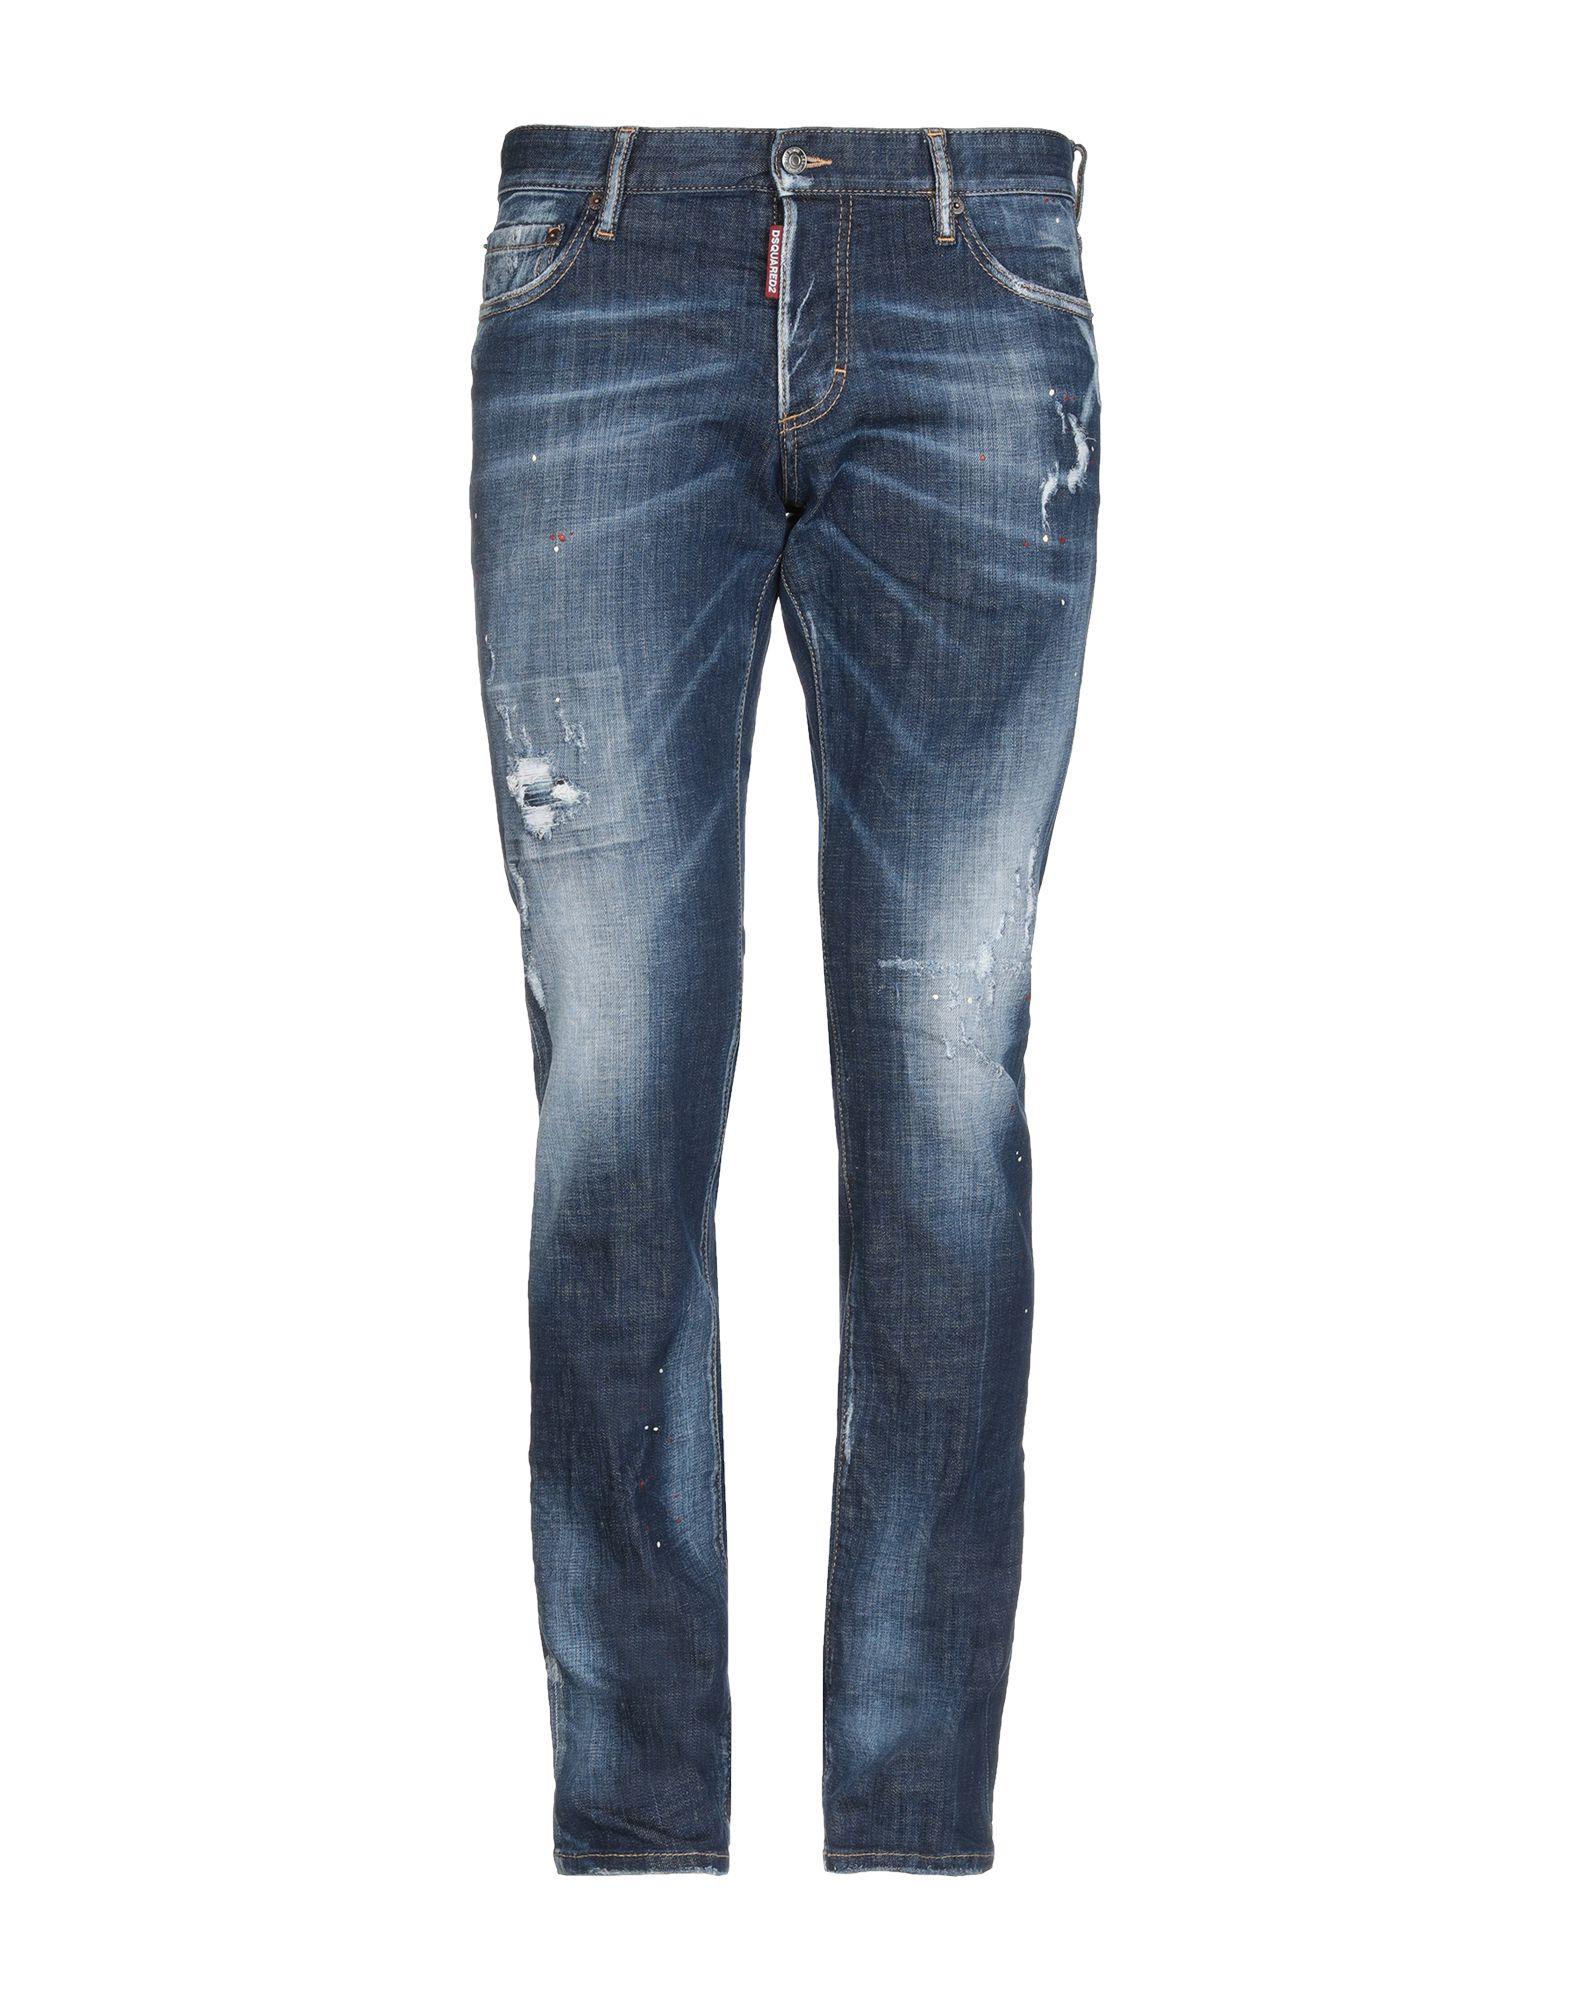 DSquared² Denim Trousers in Blue for Men - Lyst